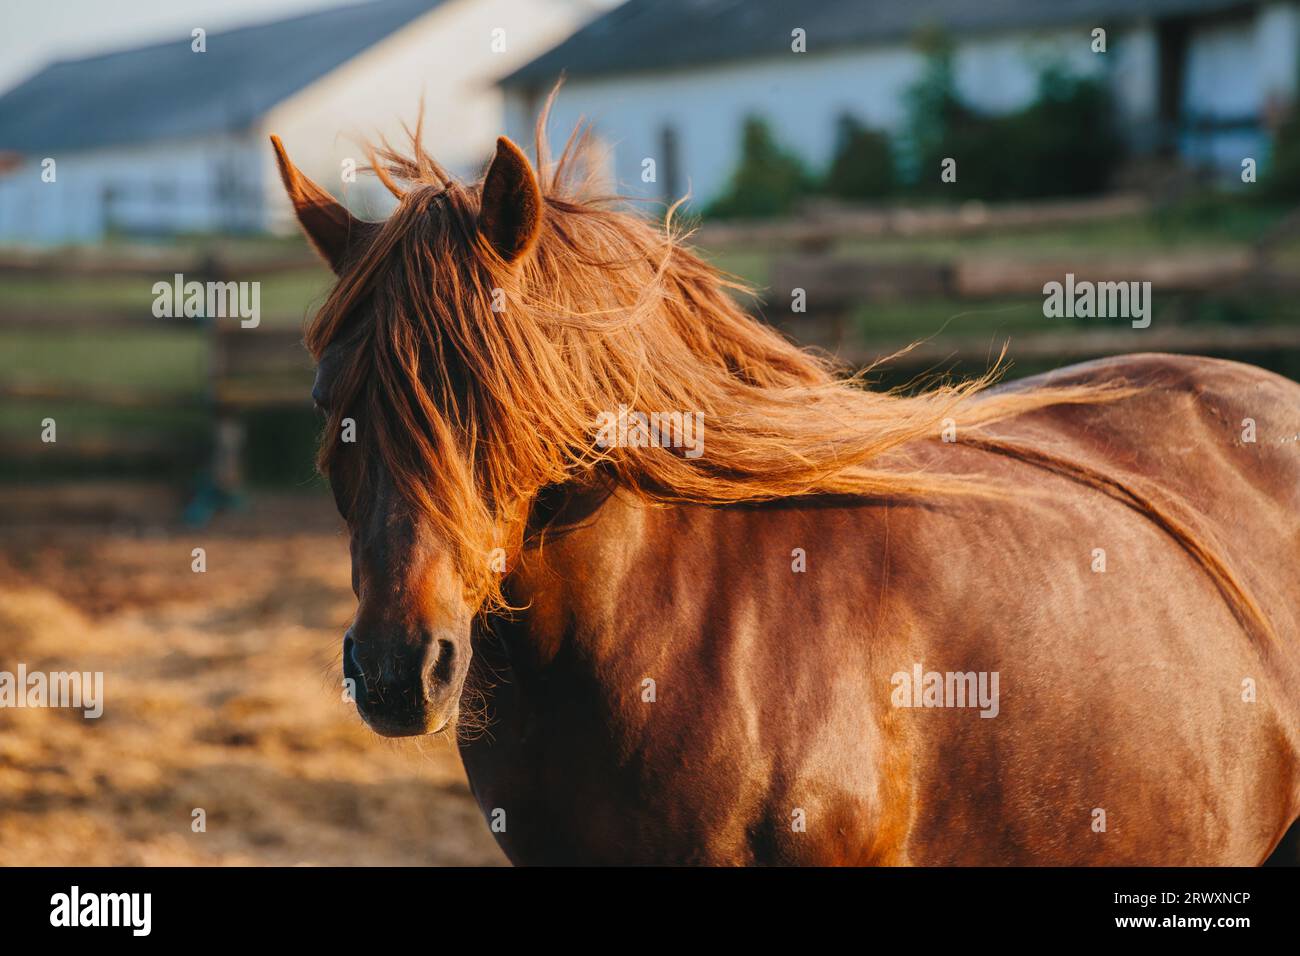 Close-up portrait of a working horse at sunset. Stock Photo